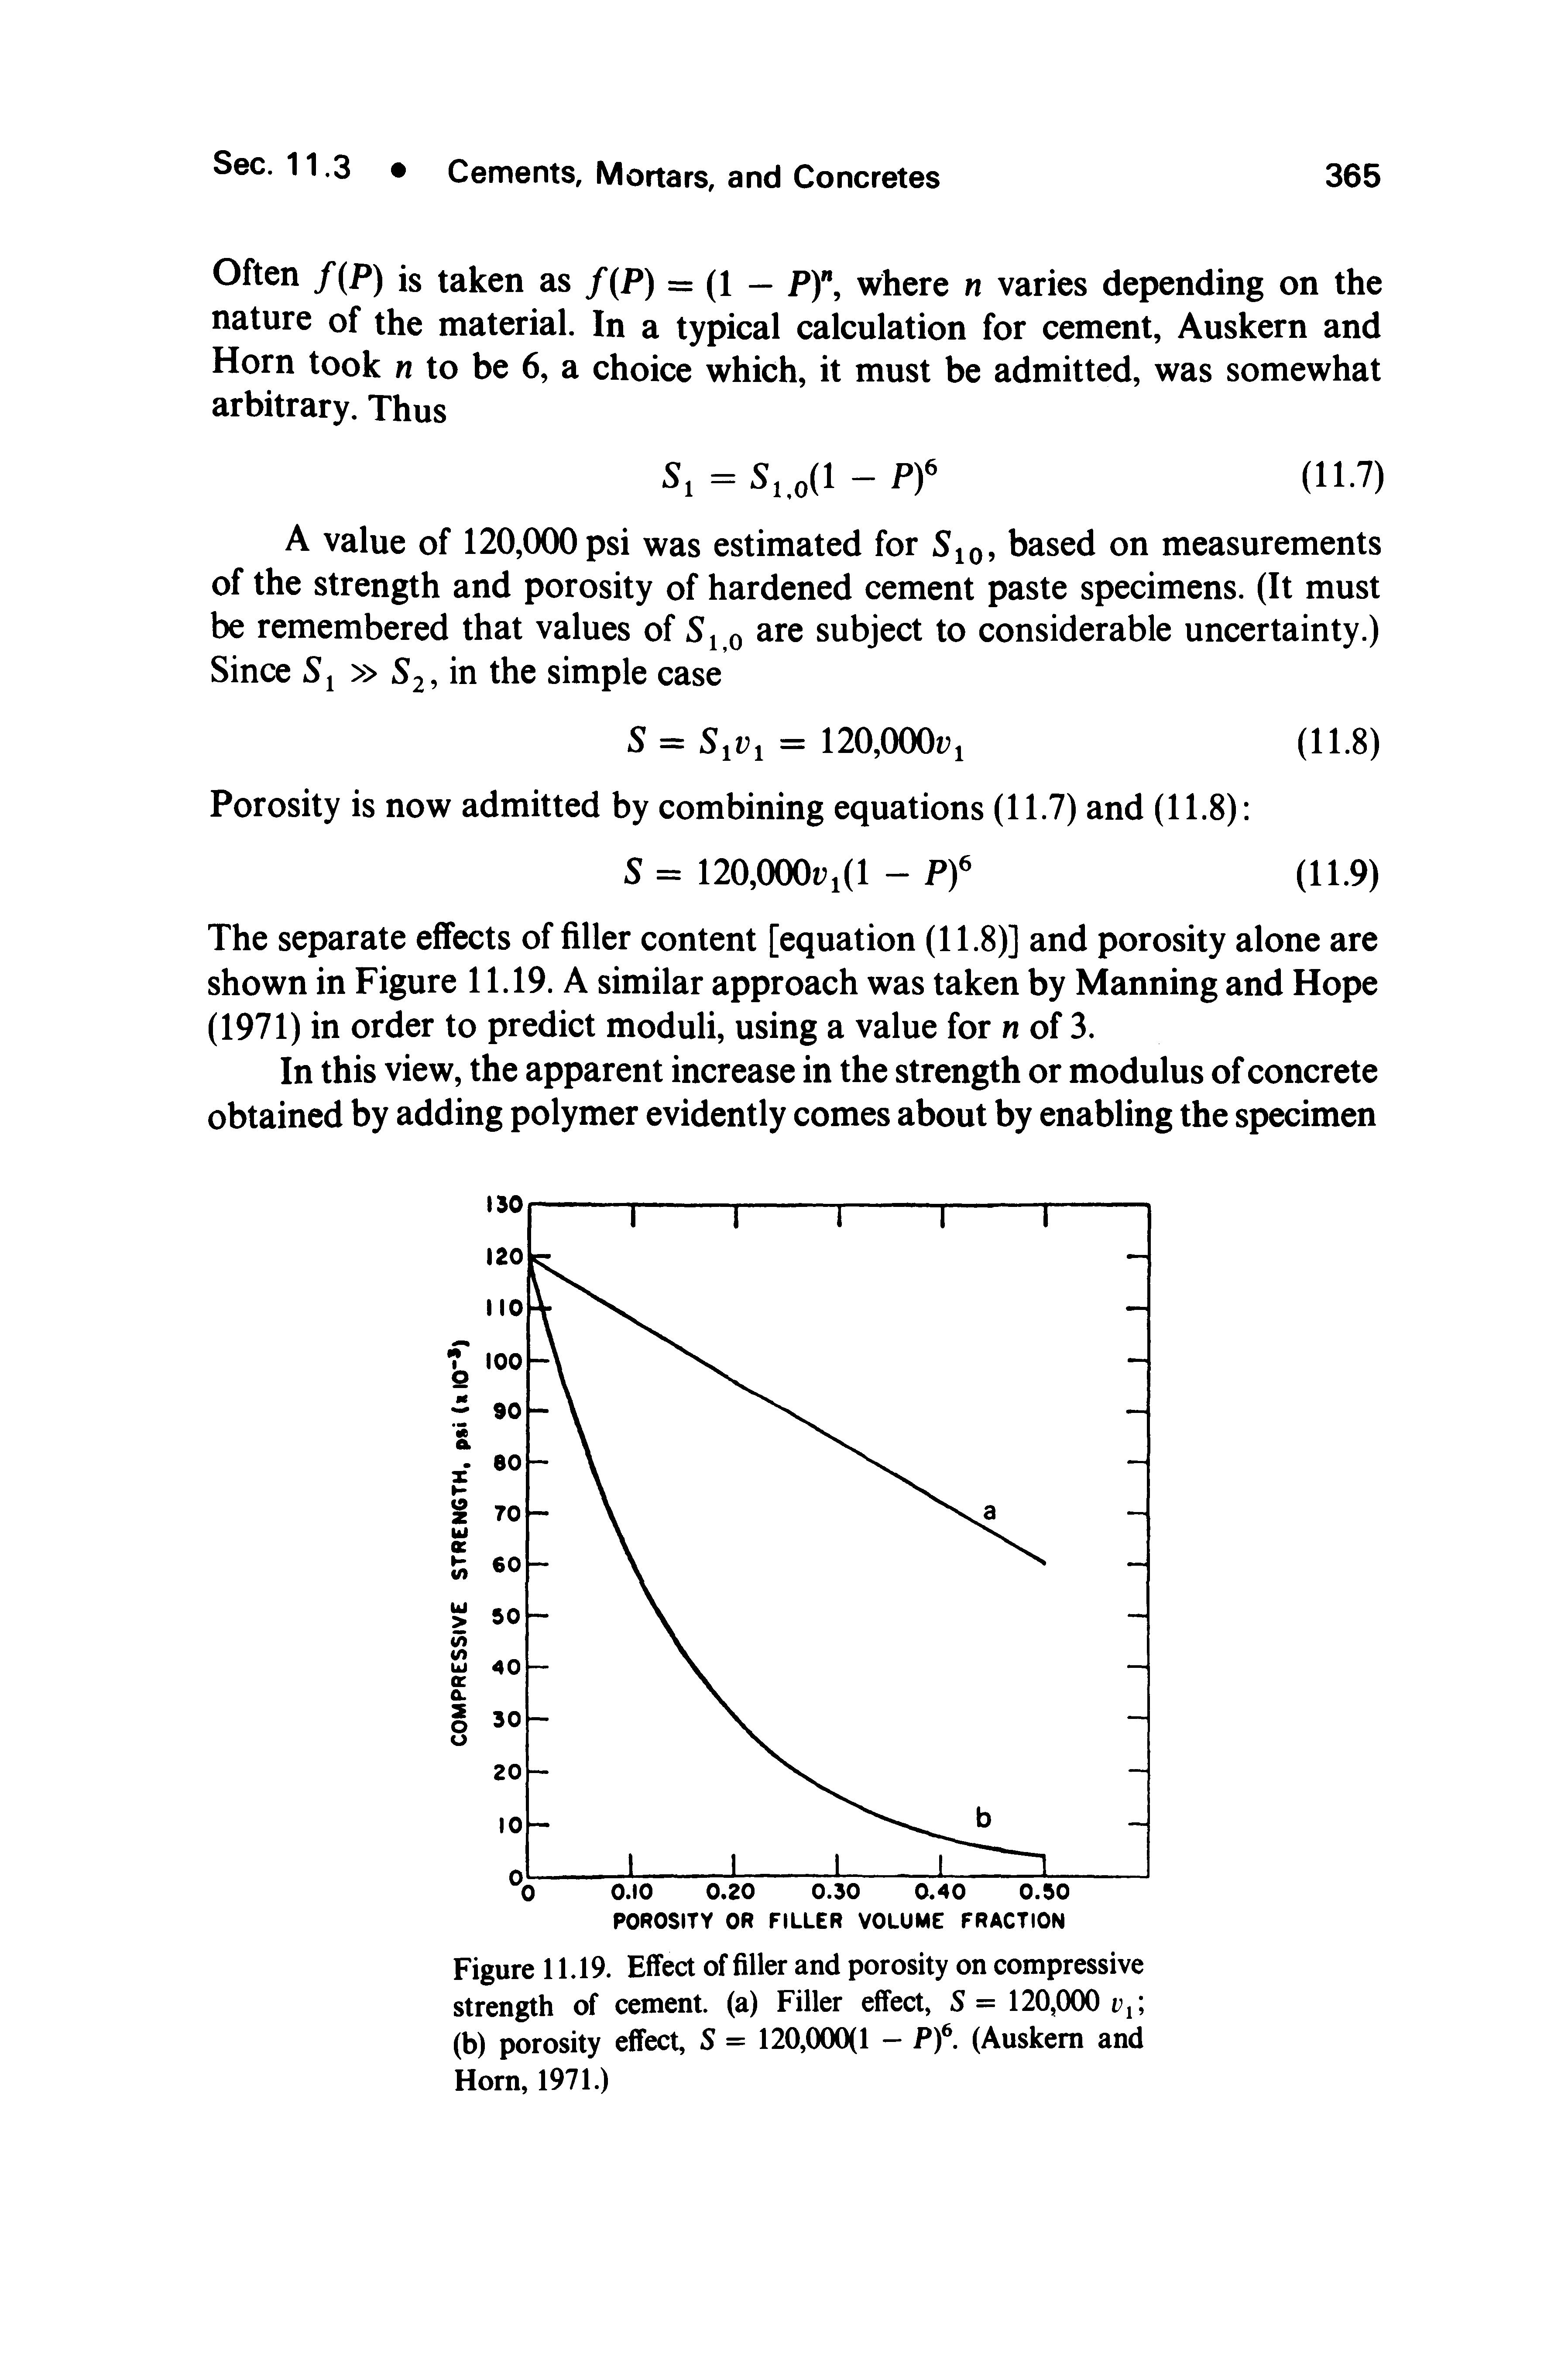 Figure 11.19. Effect of filler and porosity on compressive strength of cement, (a) Filler effect, S= 120,000 (b) porosity effect, S = 120,000(1 - Pf. (Auskern and Horn, 1971.)...